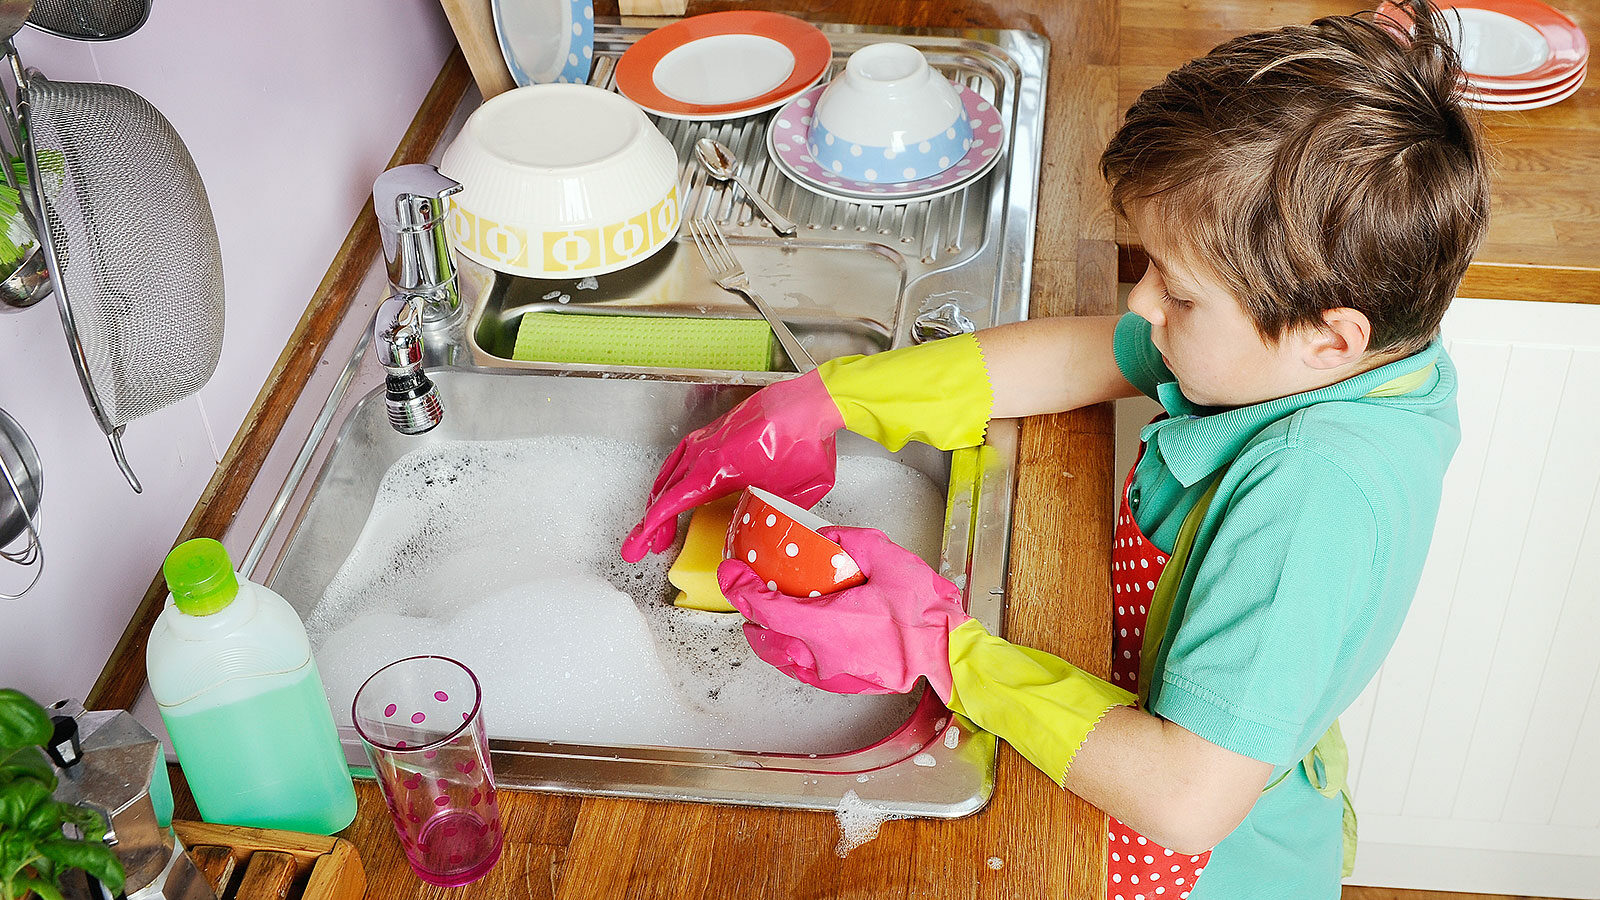 A young boy diligently completing chores in a kitchen sink.